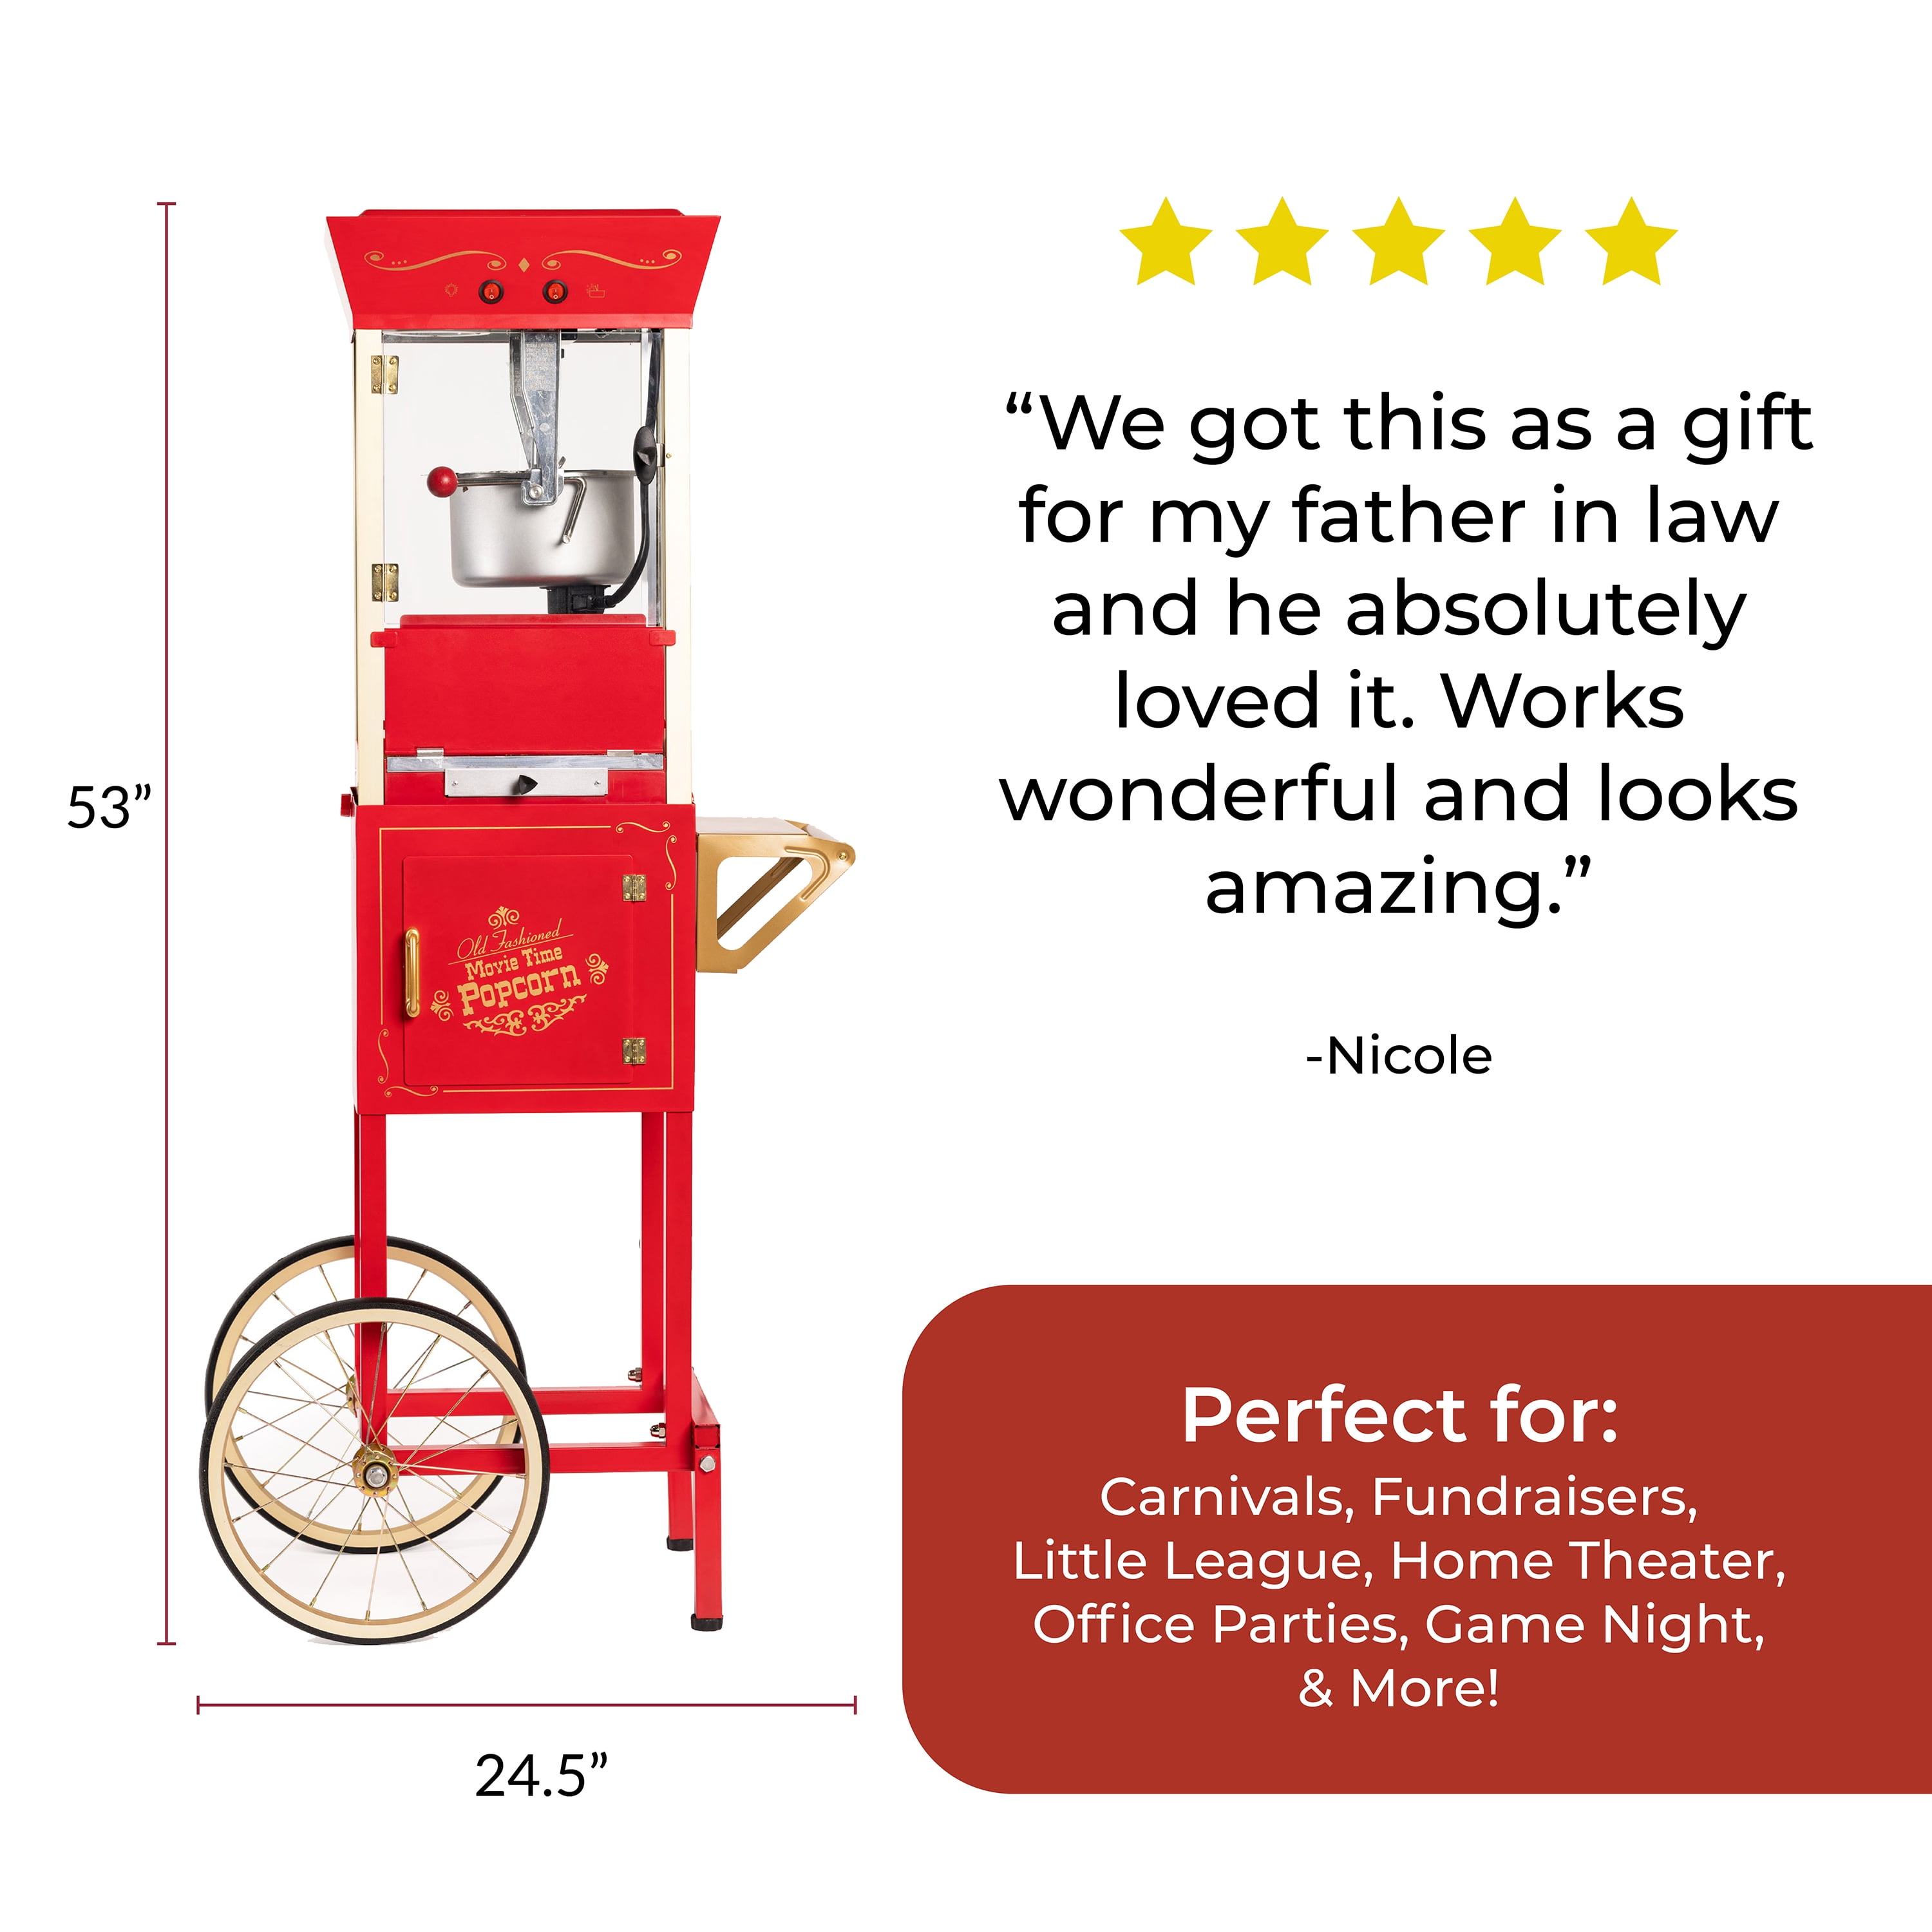 RIEDHOFF Commercial Popcorn Machine with Stand - Professional Cart Popcorn Maker Machine with 8 oz Kettle Makes Up to 60 Cups, with Lockers for Home